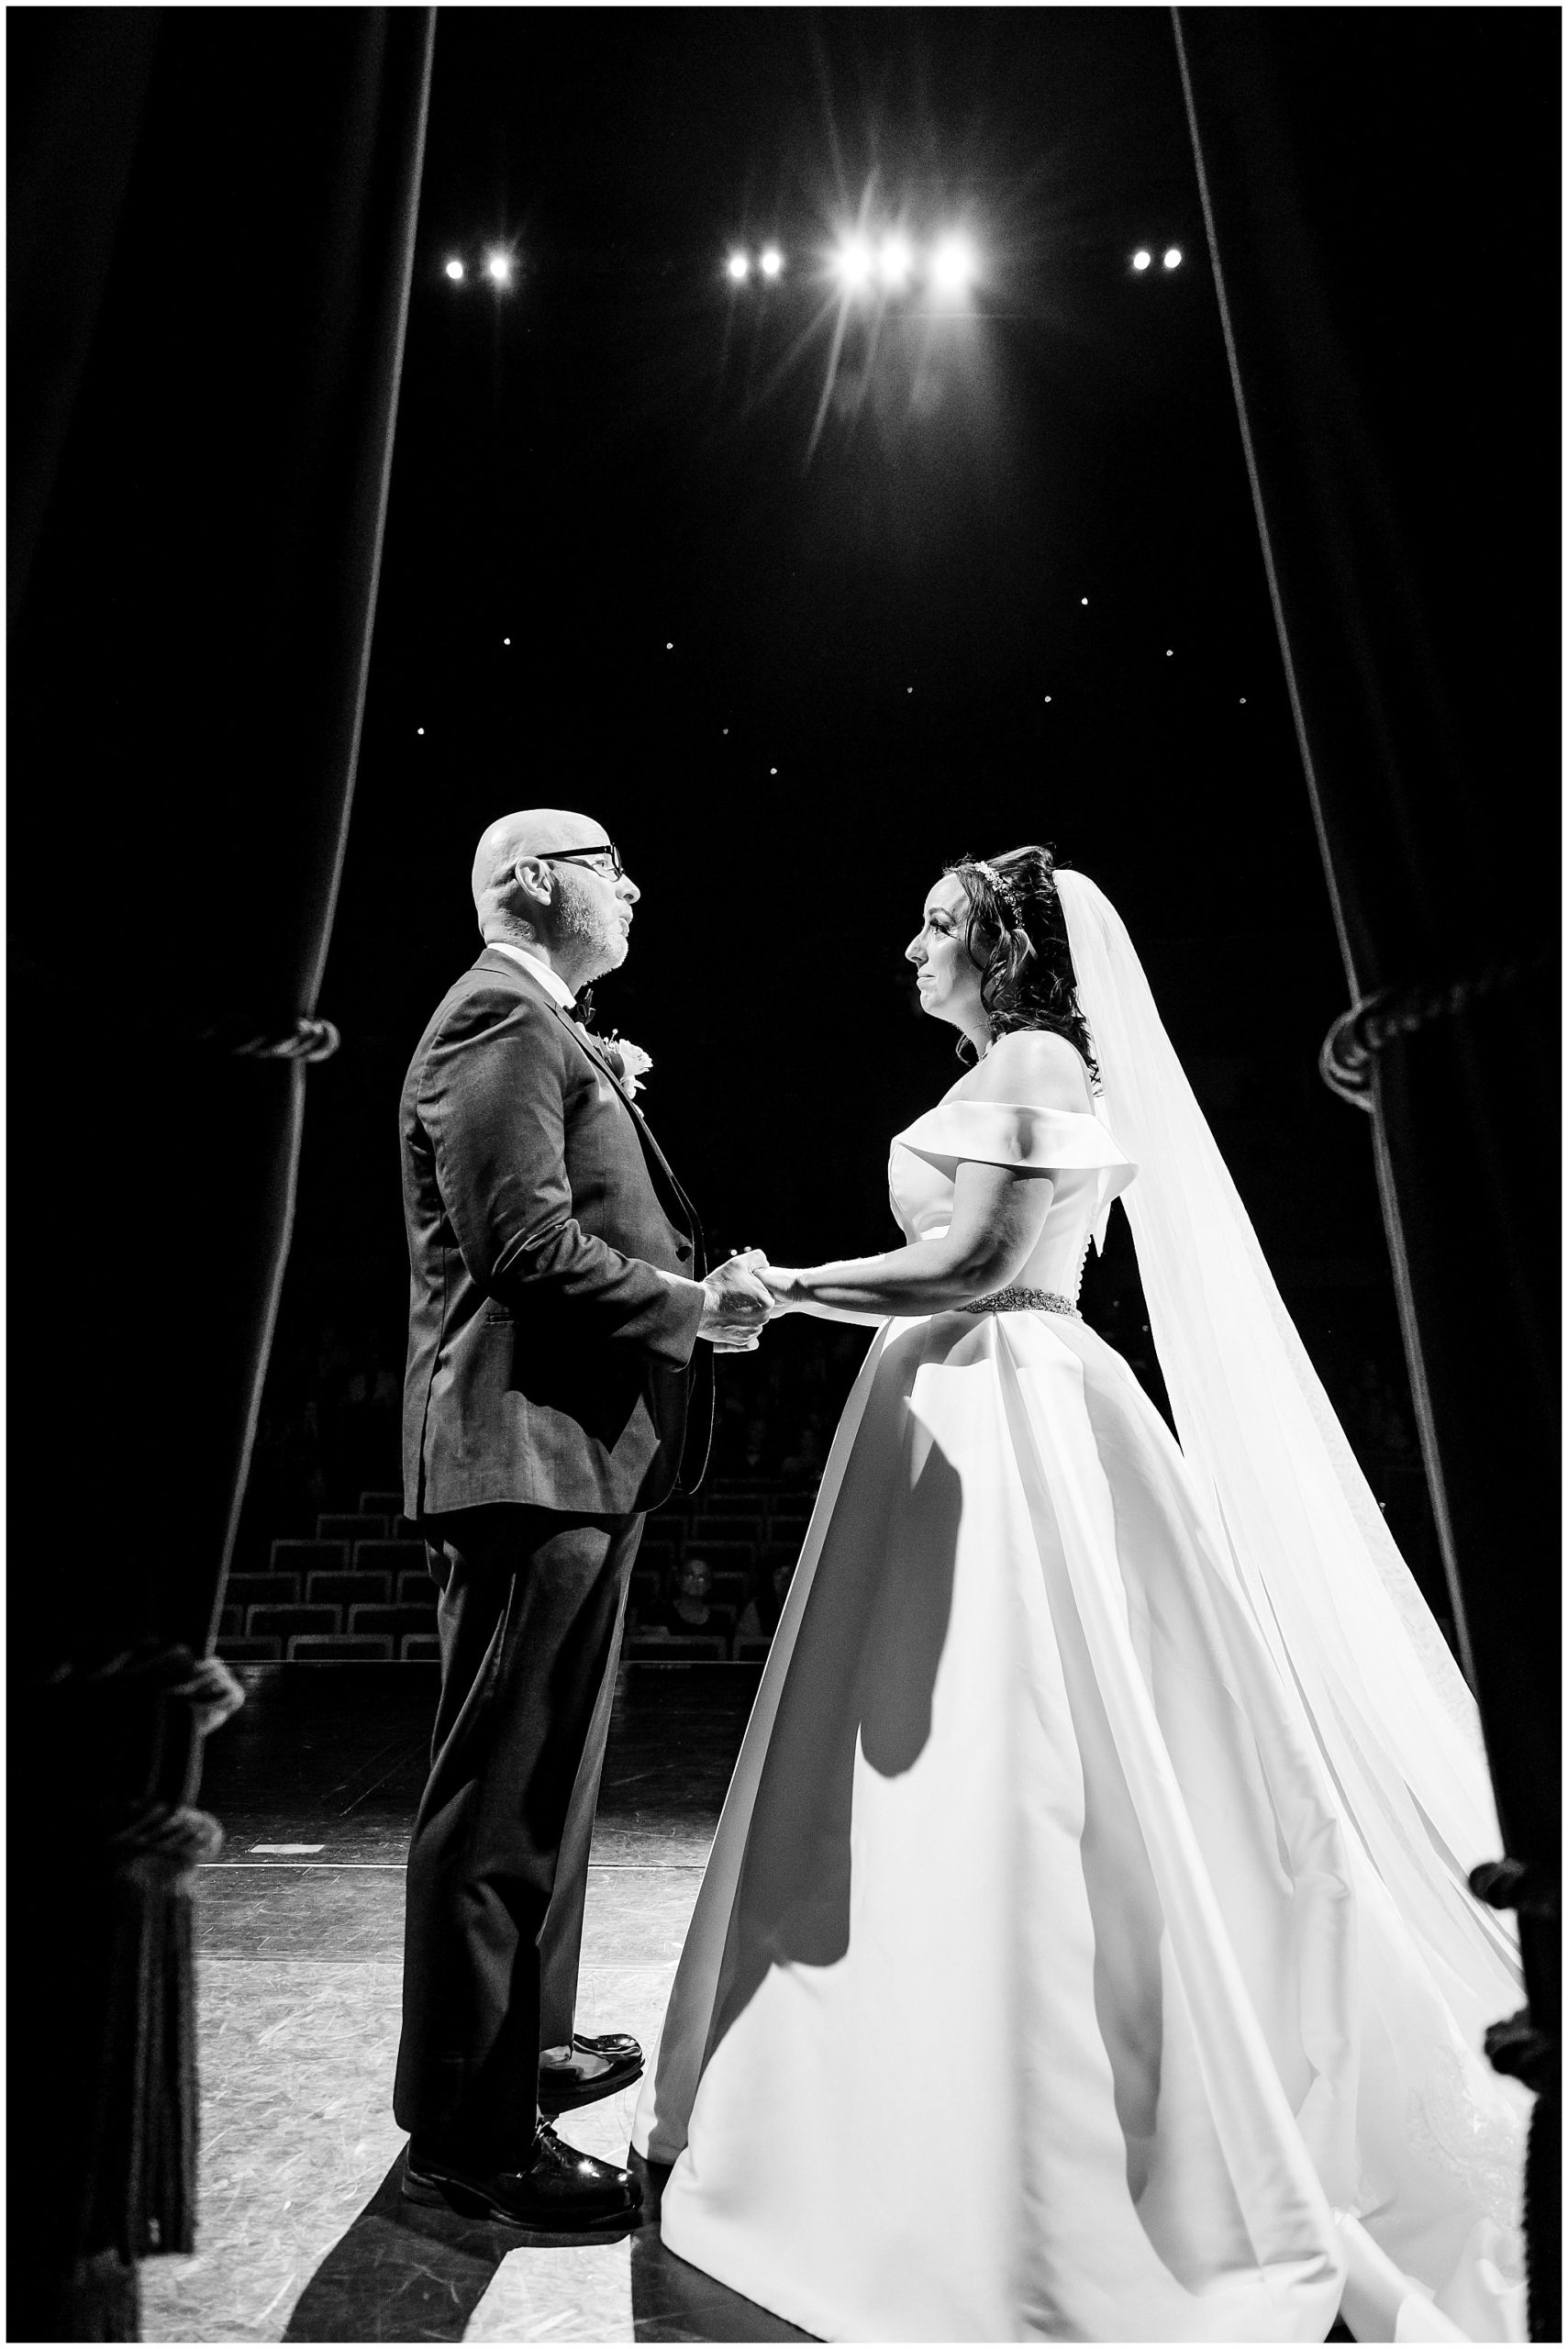 Wedding ceremony musical production | Broadway Musical Theatre Wedding